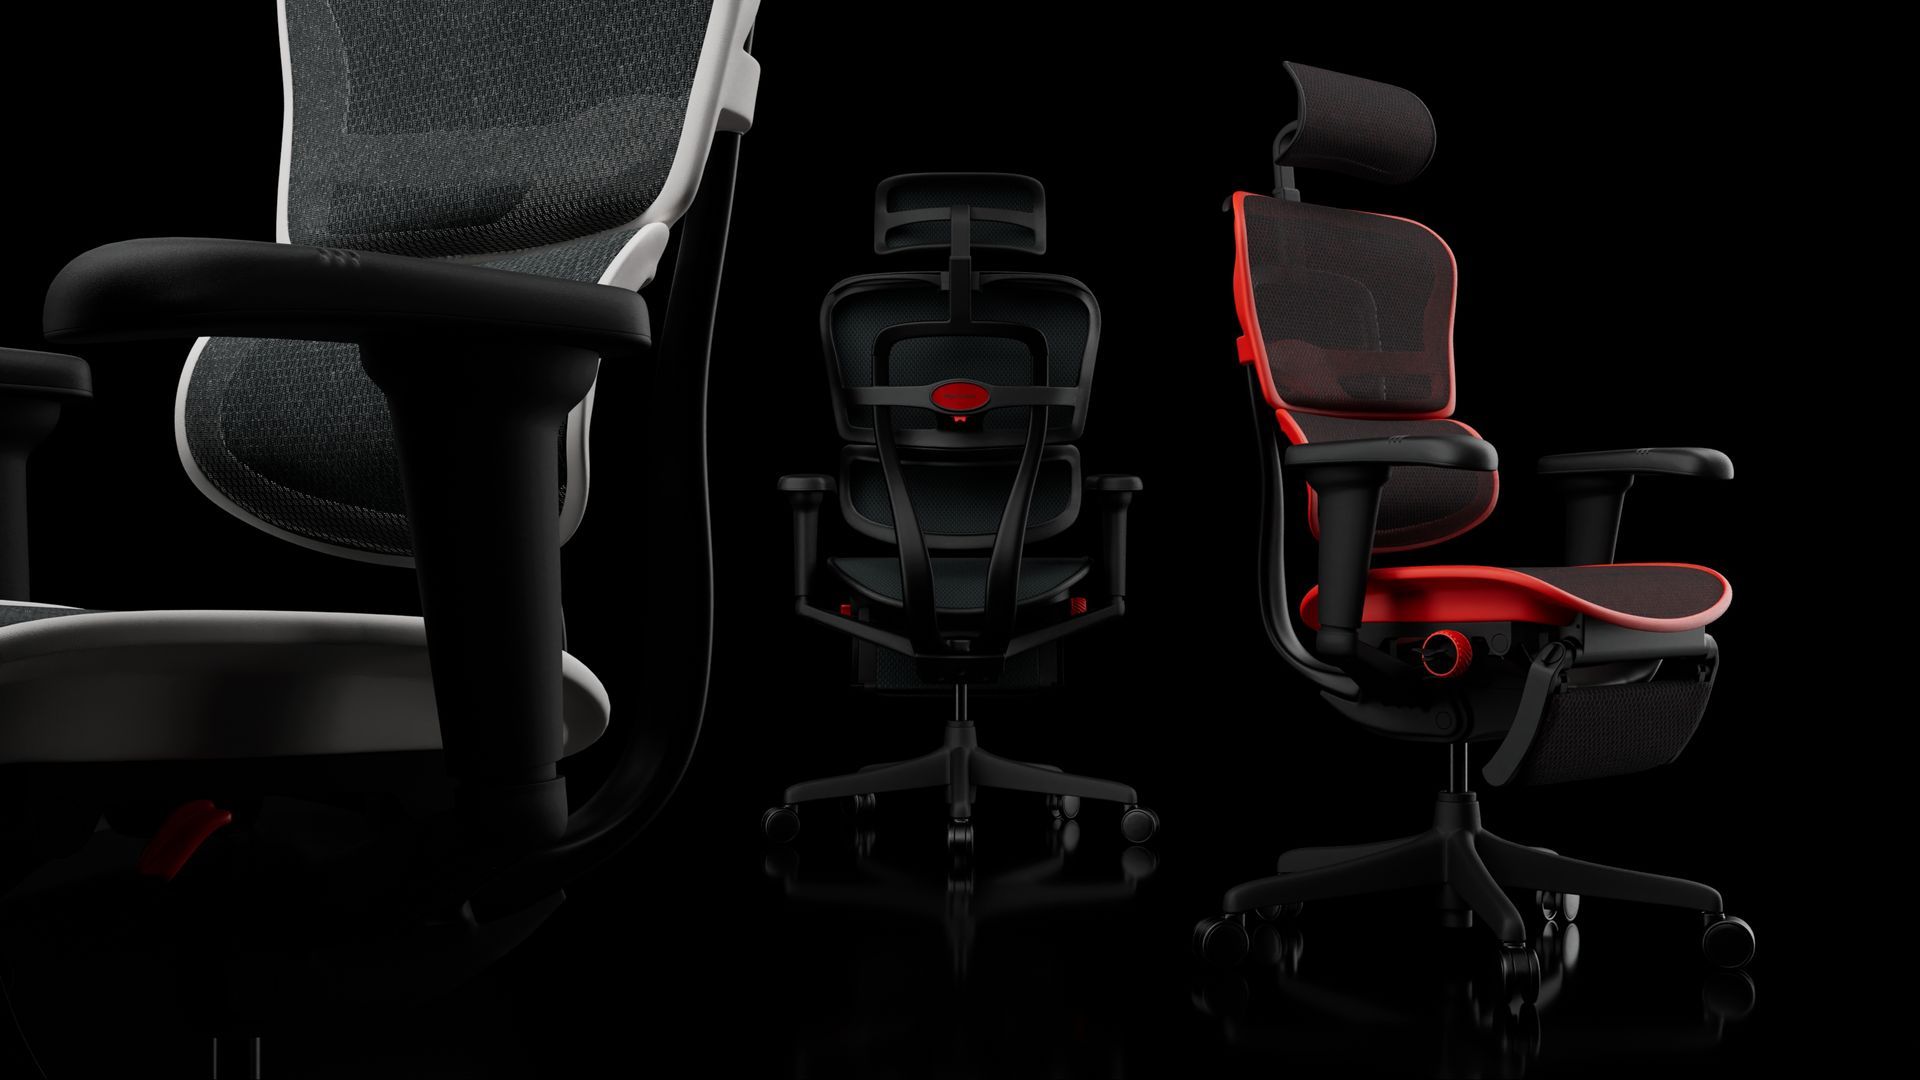 three Ergohuman Ultra gaming chairs with white, black and red frames. the black is in the middle, showcasing the rear view. the red is to the right, angled 45-degree forward to the right. the white is at the left, facing 45-degrees to the left